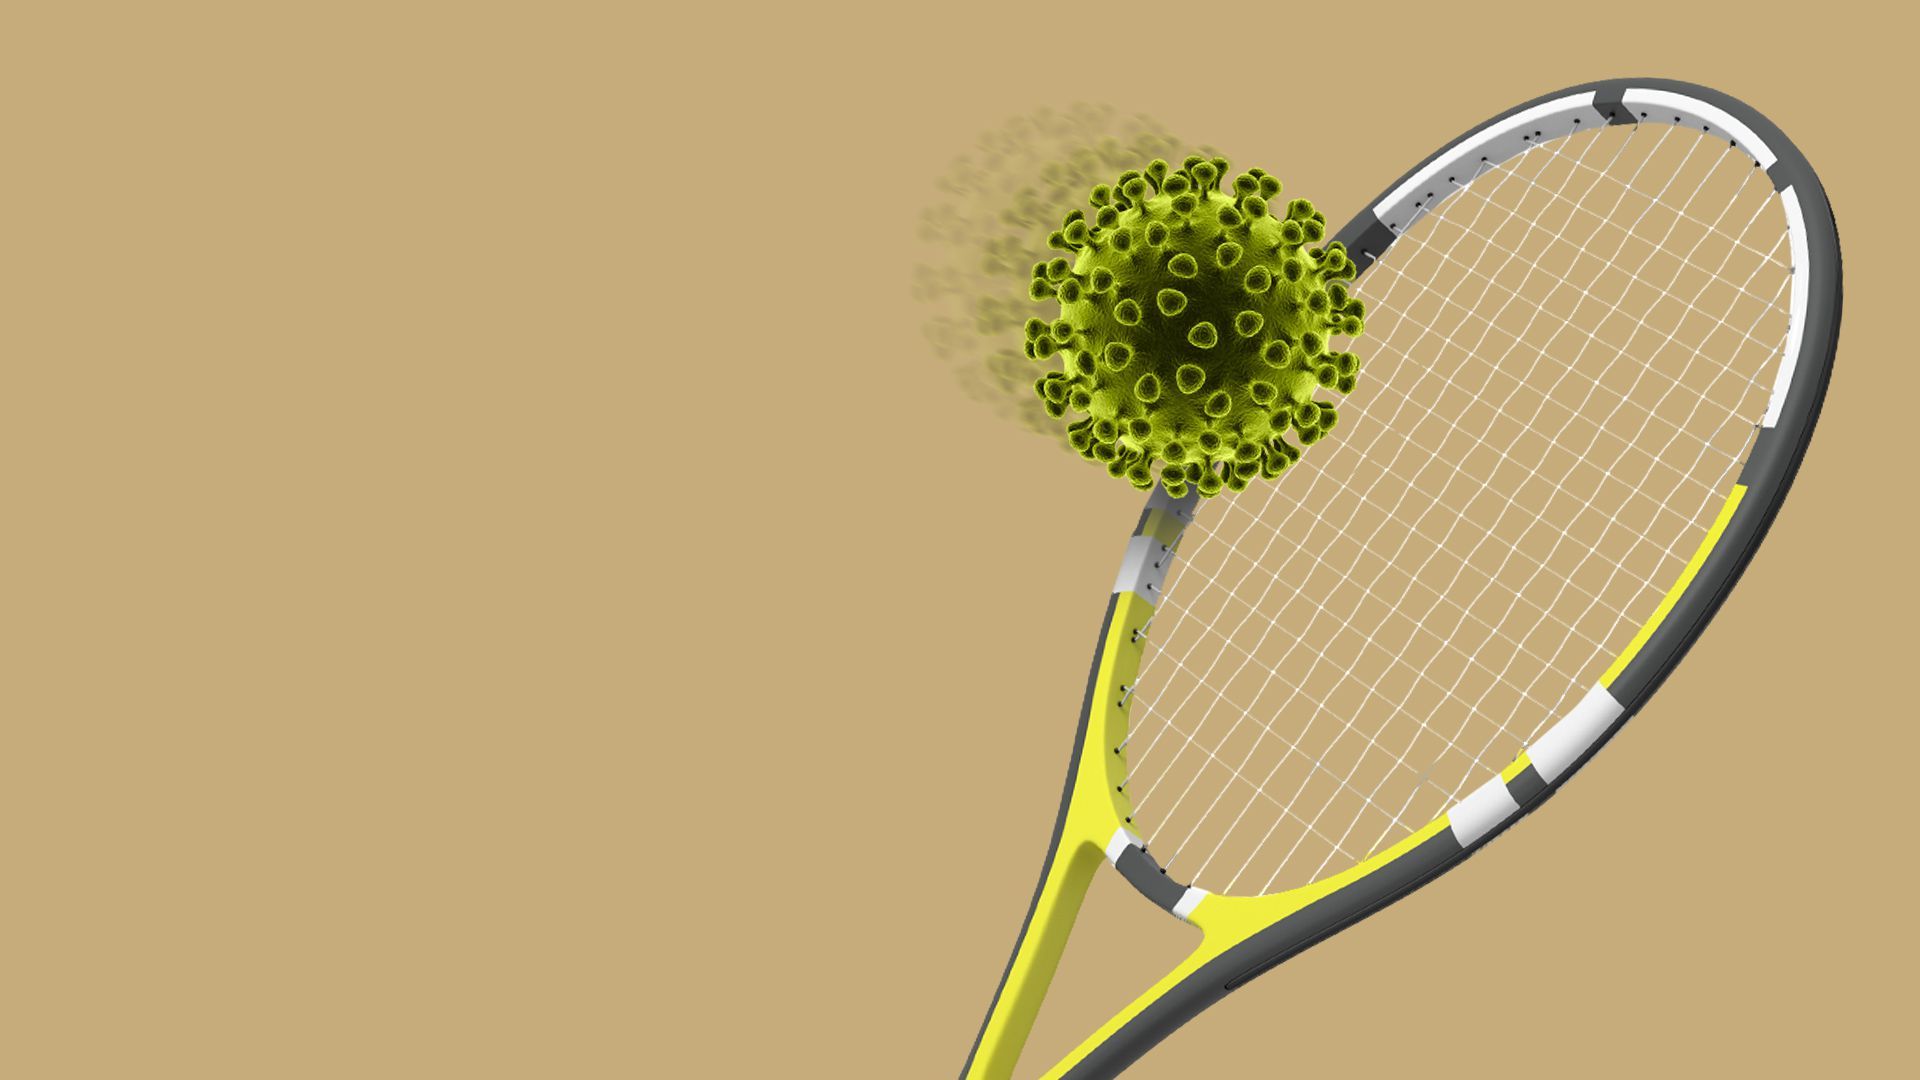 Illustration of a tennis racket hitting a coronavirus cell the size of a tennis ball